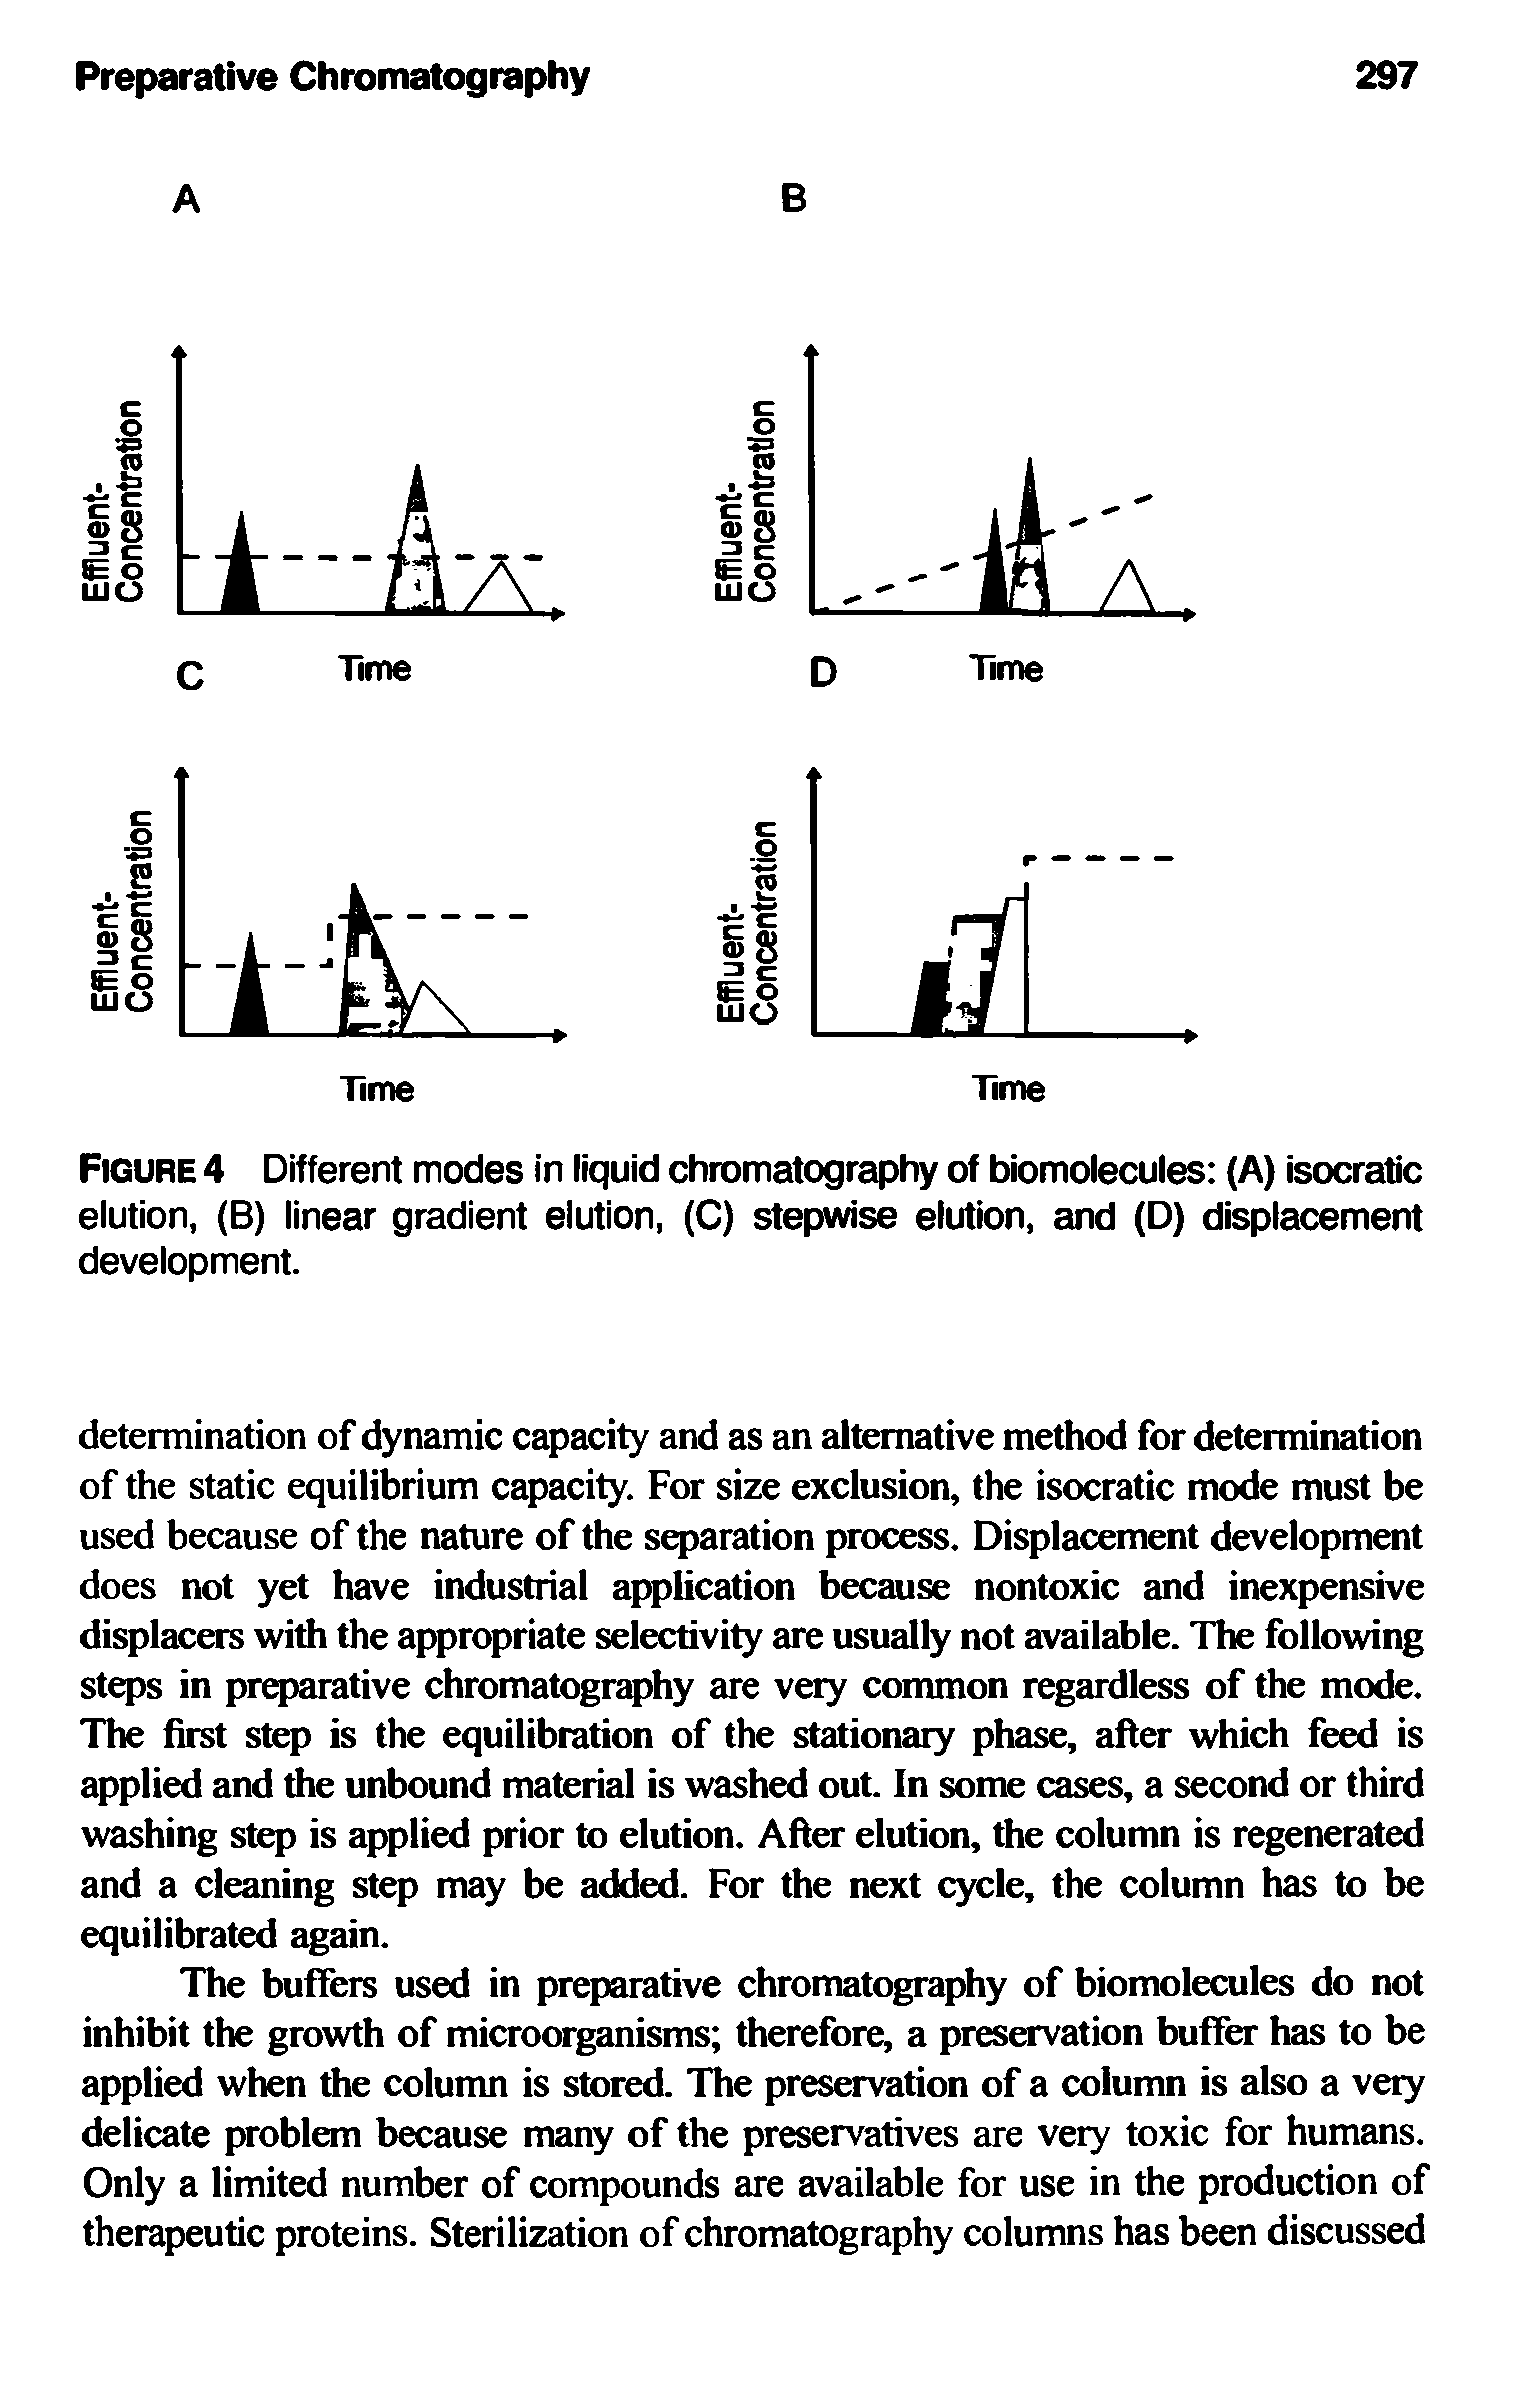 Figure 4 Different modes in liquid chromatography of biomolecules (A) isocratic elution, (B) linear gradient elution, (C) stepwise elution, and (D) displacement development.